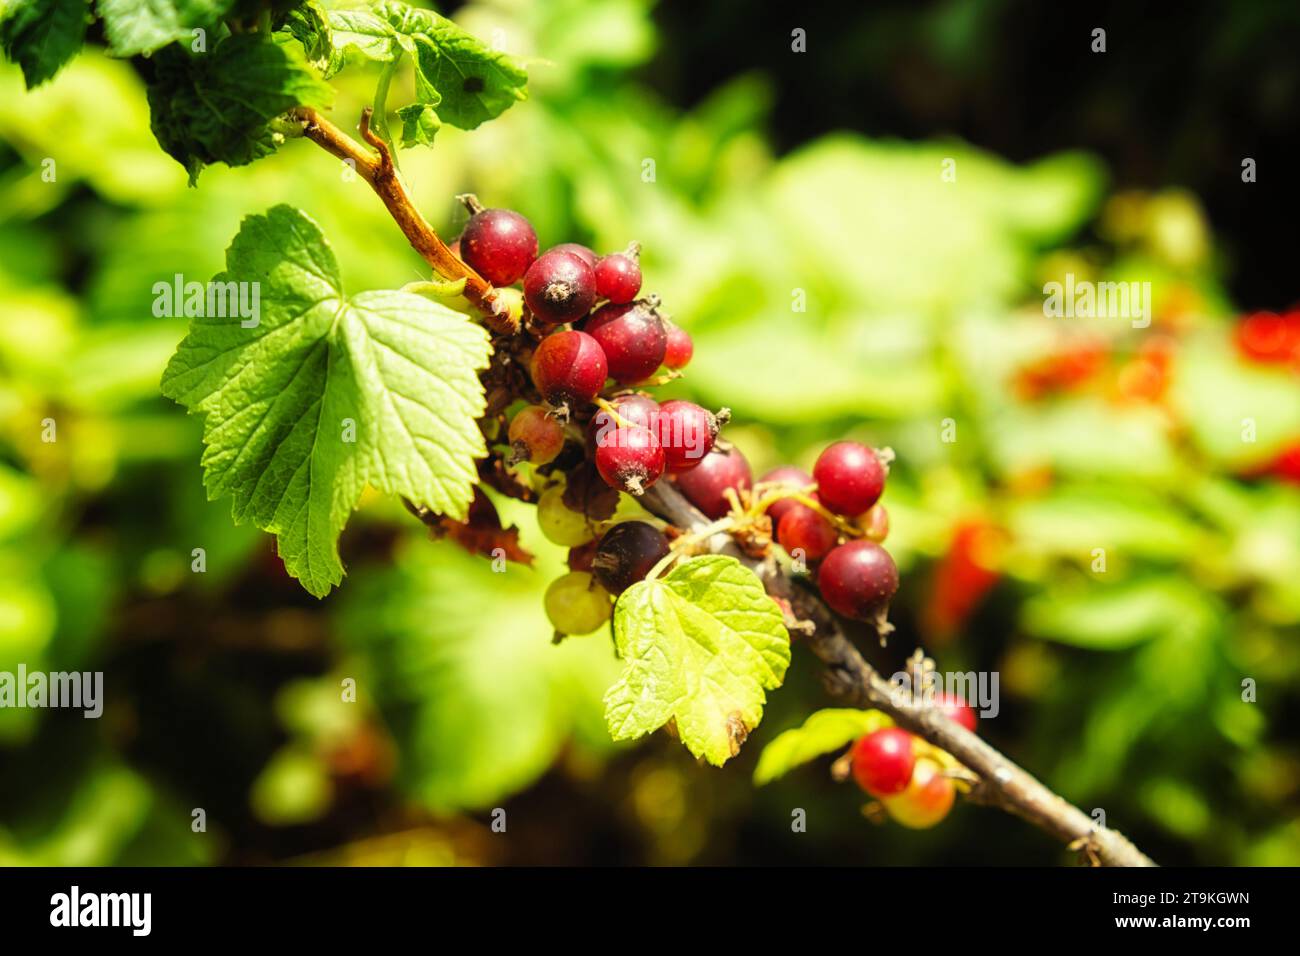 A branch of a bush with green leaves and dark purple berries. The background is blurred and consists of more greenery. Unripe berries of black currant Stock Photo